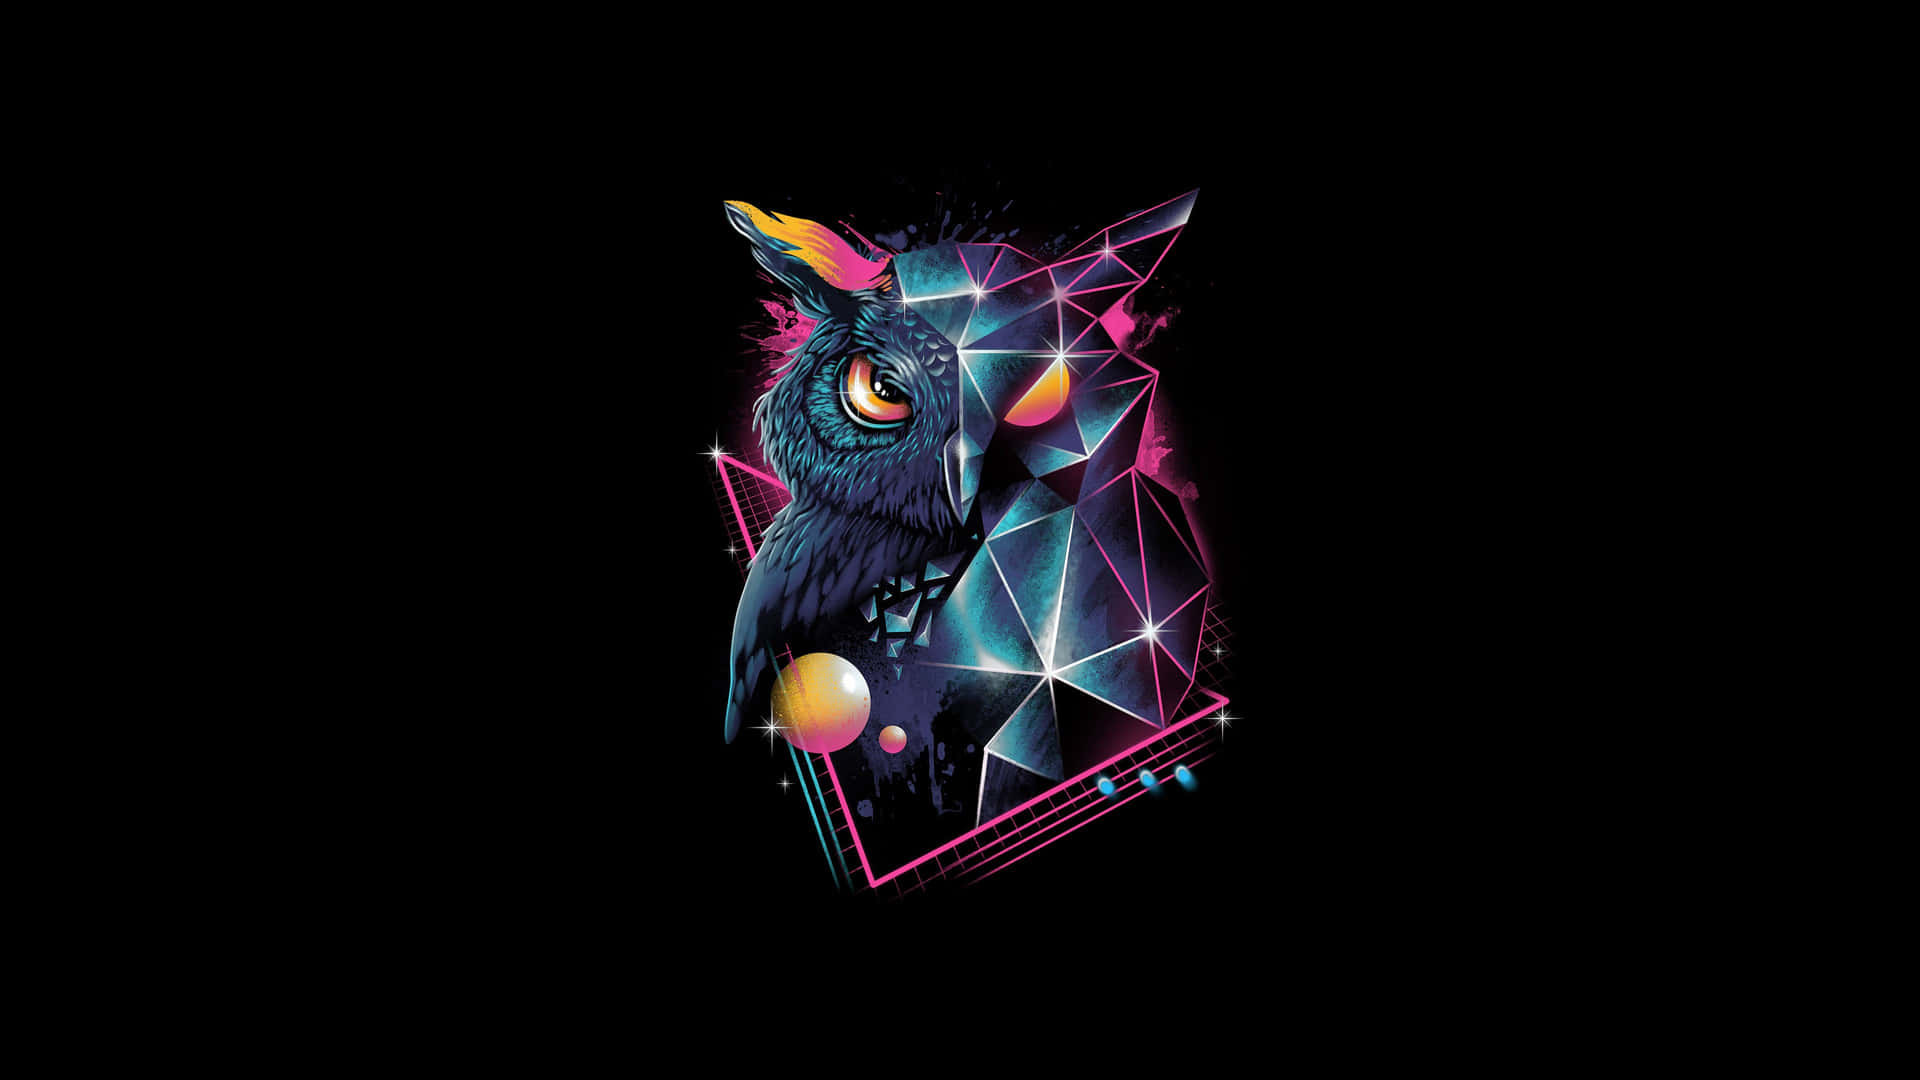 Owl Vector And Polygon Art 4k Oled Background